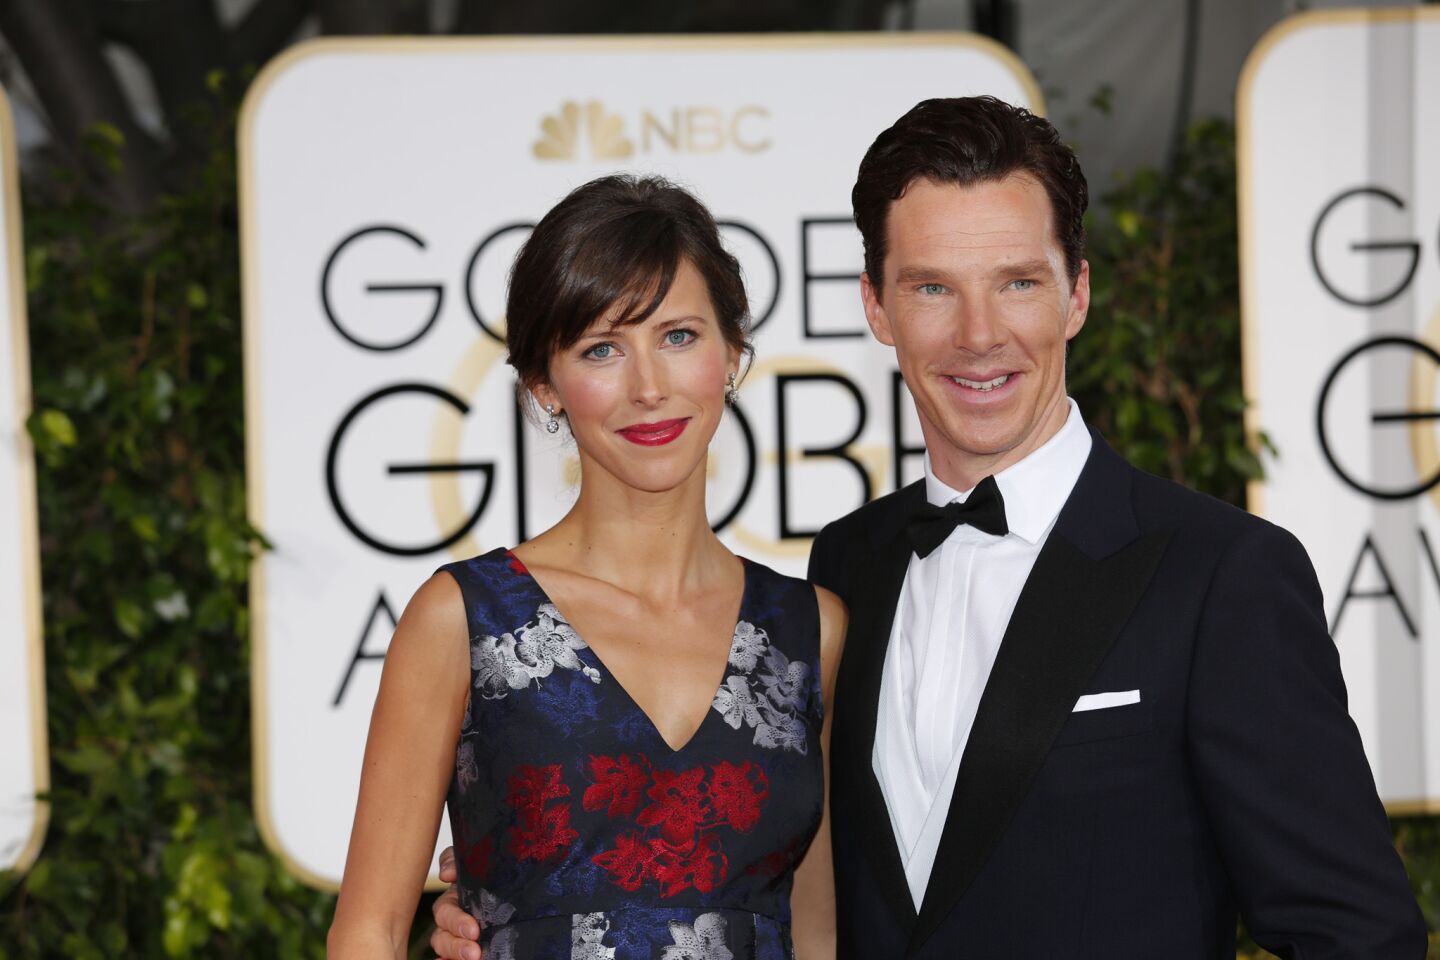 Cumberbatch, shown with Sophie Hunter at the 2015 Golden Globes, will soon be seen opposite Johnny Depp in "Black Mass," and was recently announced as the star of Marvel Studios' "Doctor Strange," set for a 2016 release. He'll also reprise his "Sherlock" role in 2016.